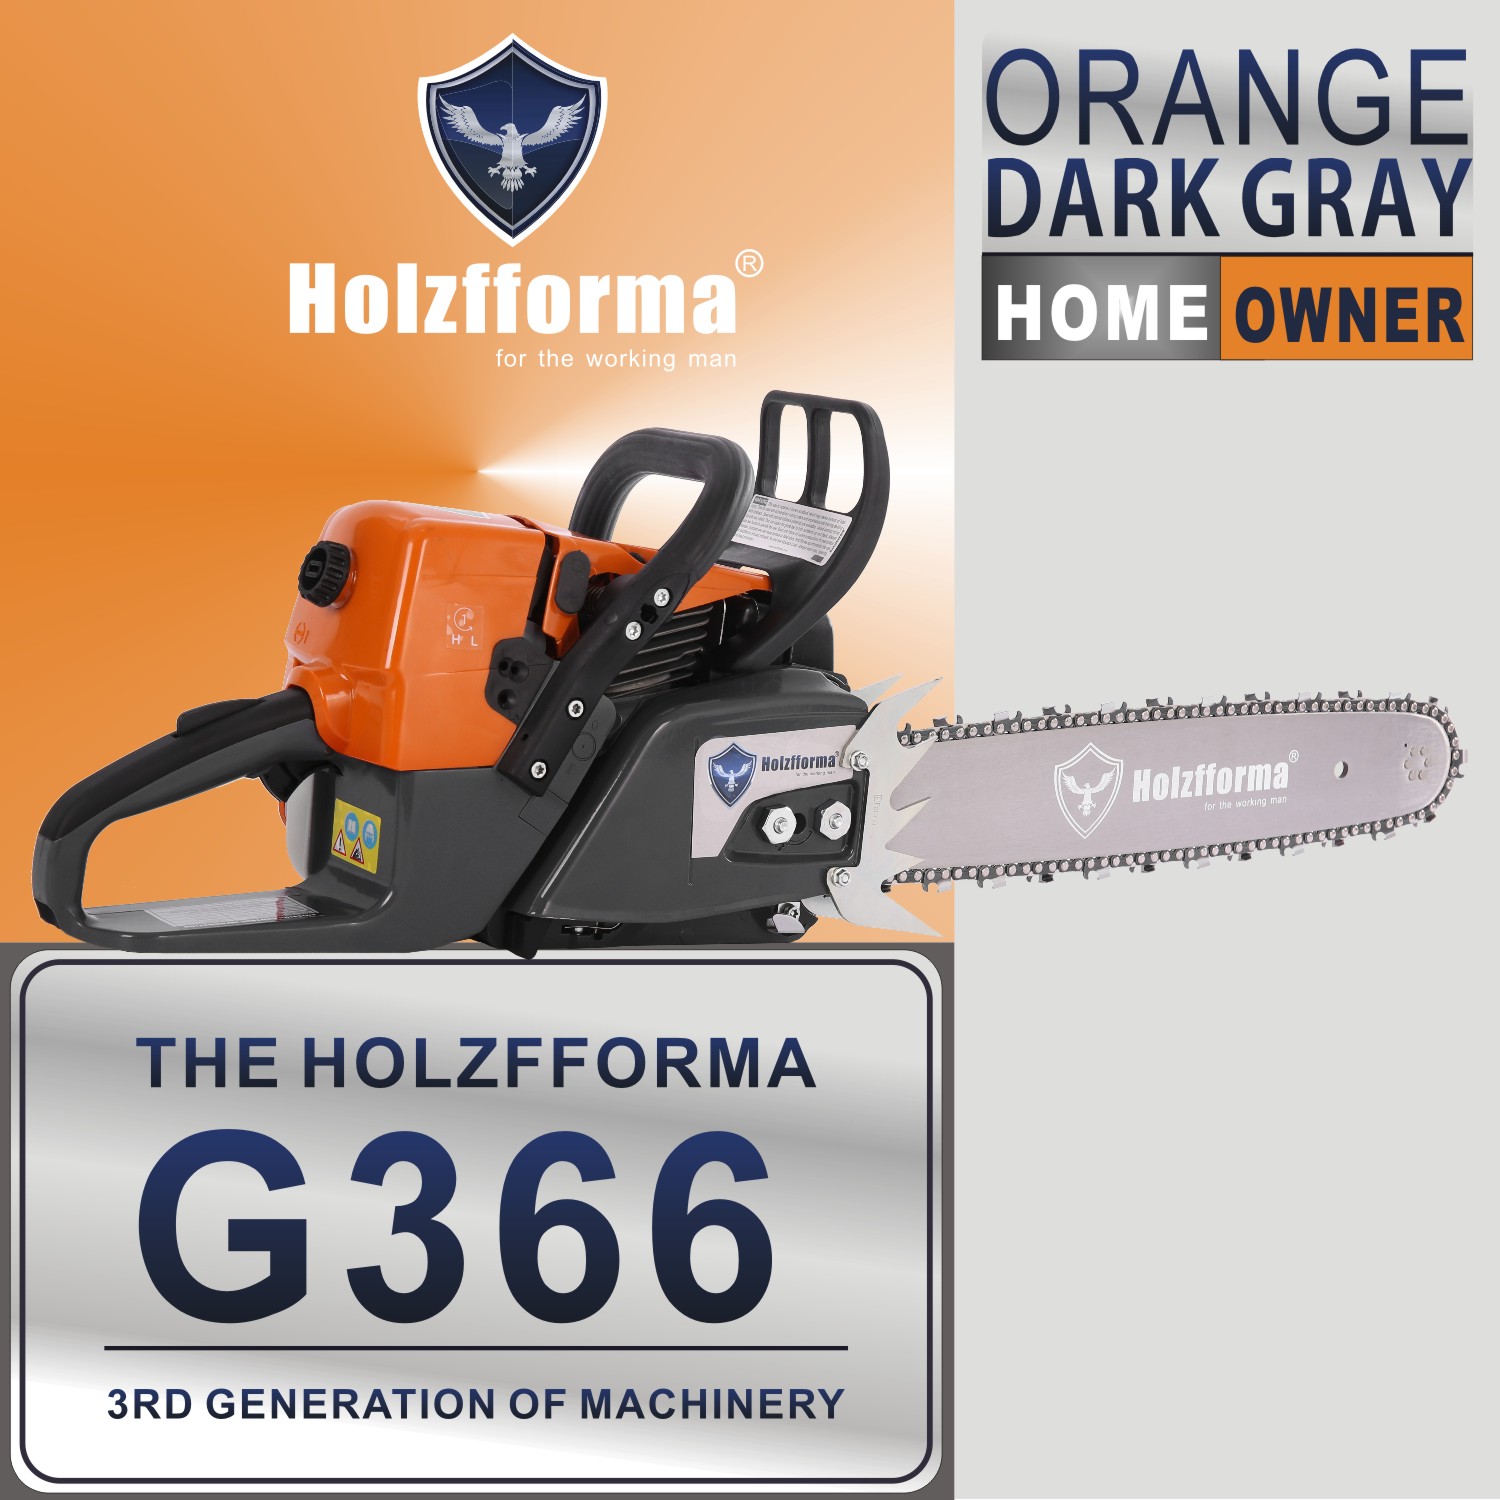 59cc Holzfforma® Orange Dark Gray G366 Gasoline Chain Saw Power Head Only Without Guide Bar and Saw Chain Parts Are For MS361 Chainsaw